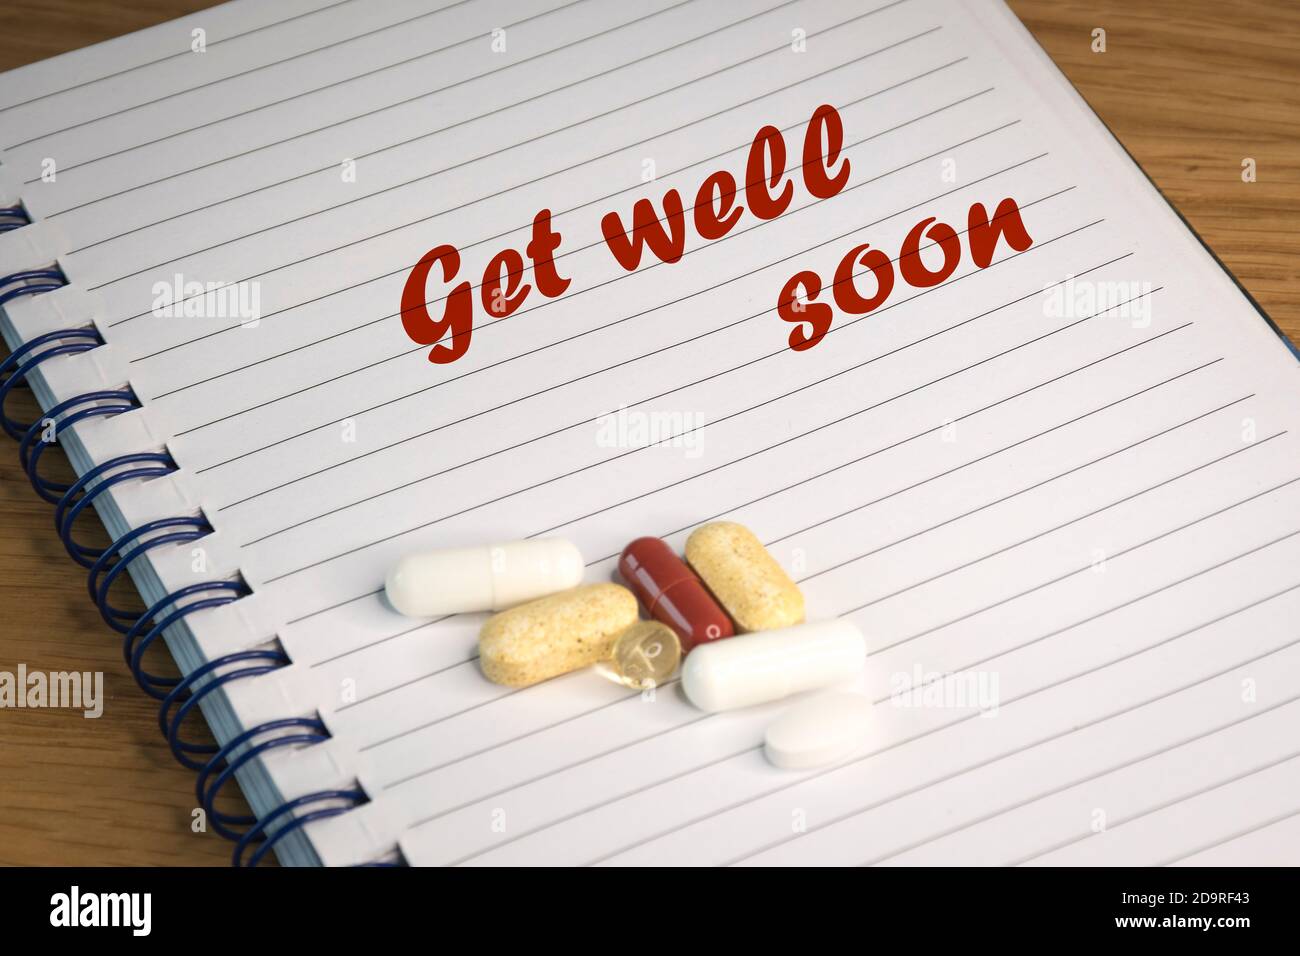 English text 'Get well soon' inspired by the worldwide Coronavirus pandemics. The text is written on lined paper. Stock Photo